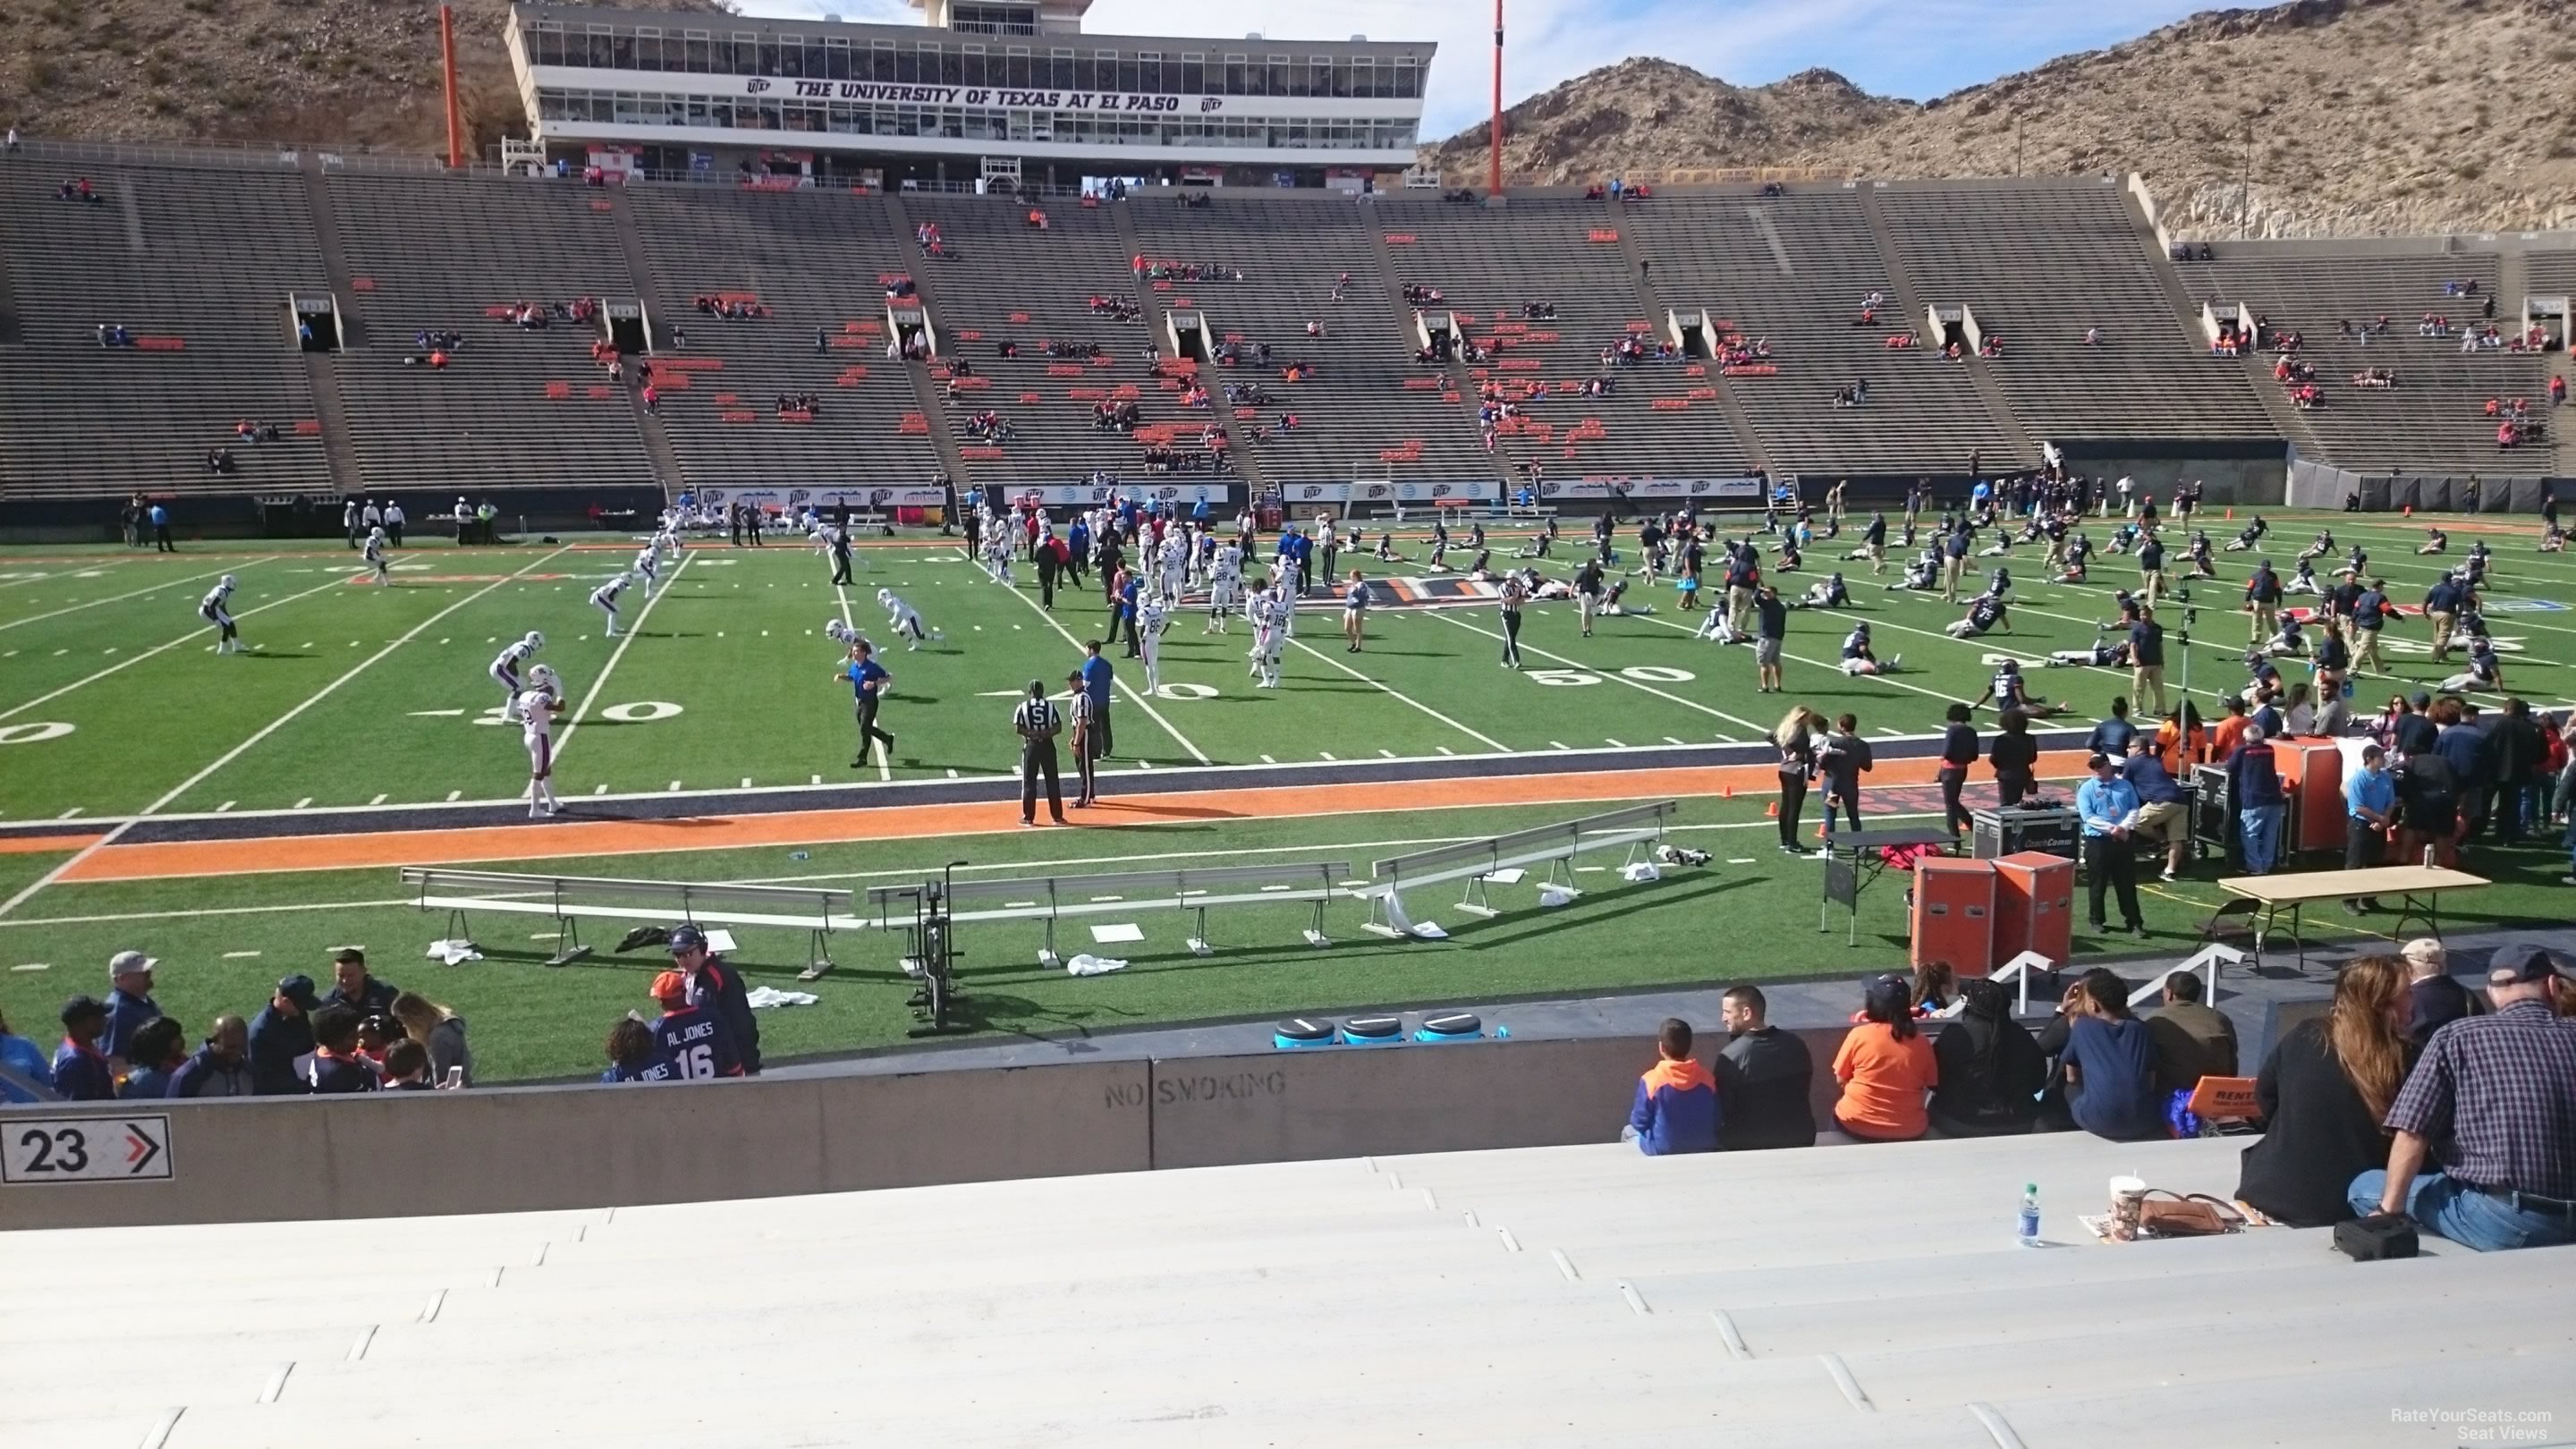 section 23, row 15 seat view  for football - sun bowl